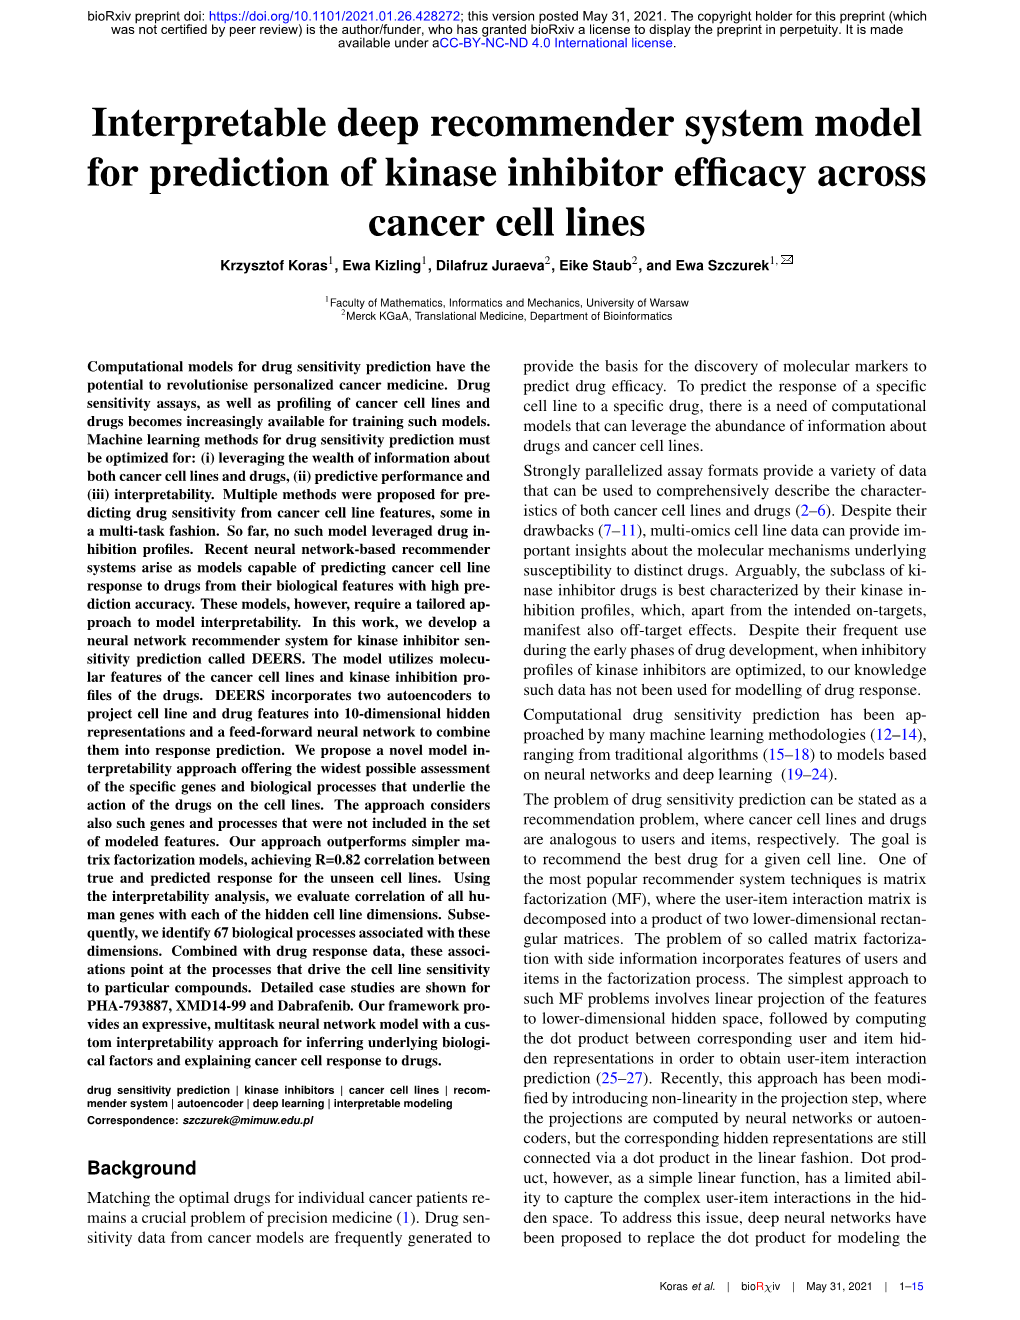 Interpretable Deep Recommender System Model for Prediction of Kinase Inhibitor Efficacy Across Cancer Cell Lines